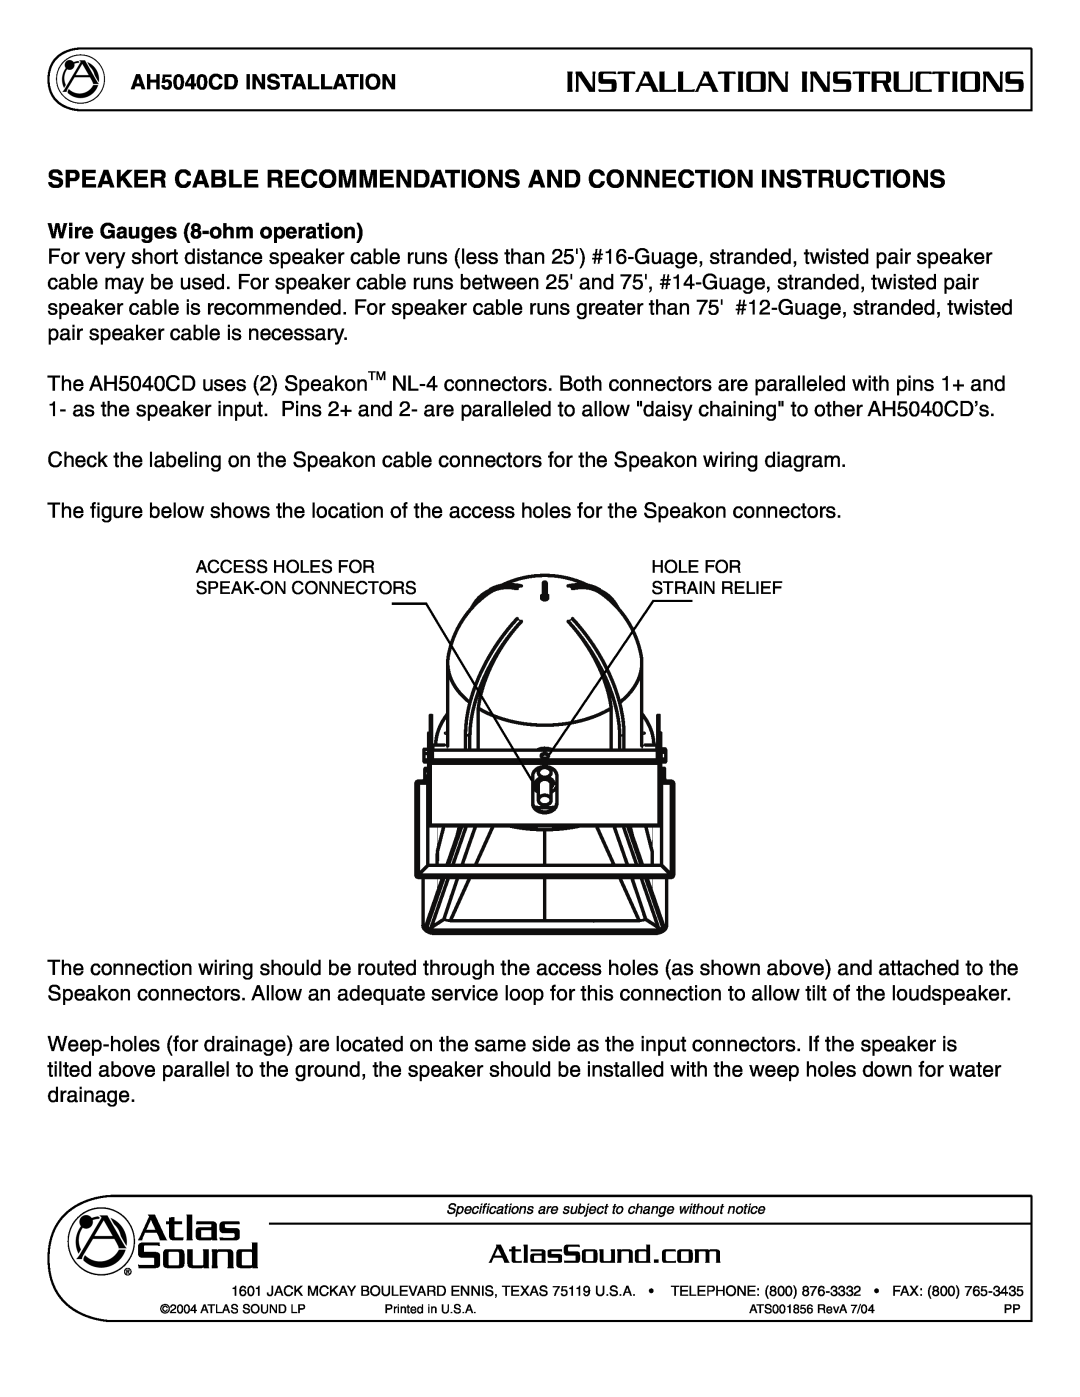 Atlas Sound Installation Instructions, AH5040CD INSTALLATION, Wire Gauges 8-ohmoperation, Access Holes For, Hole For 